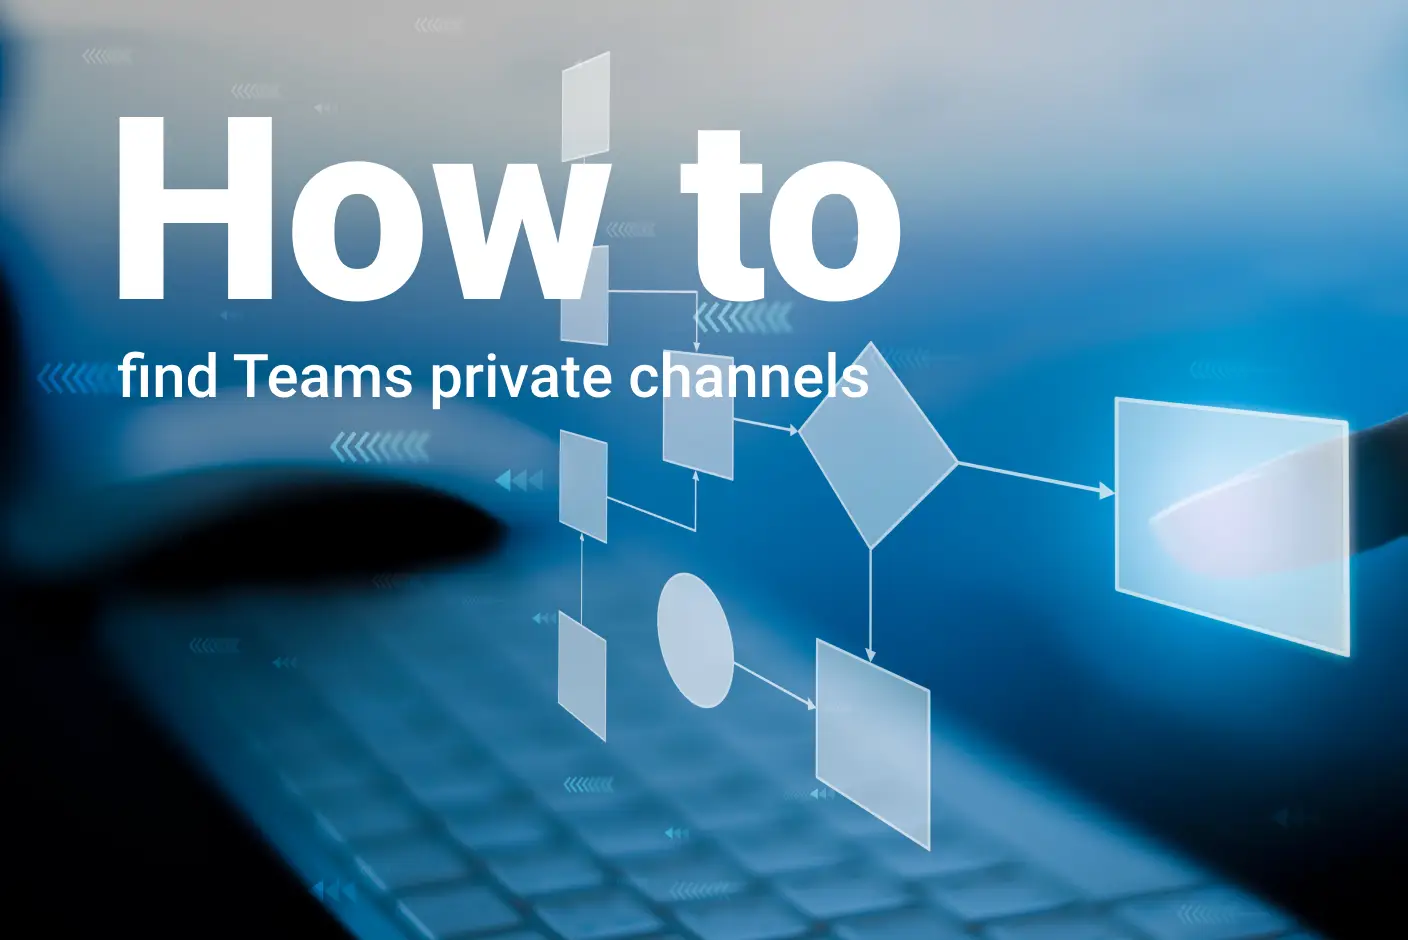 How to find Teams private channels